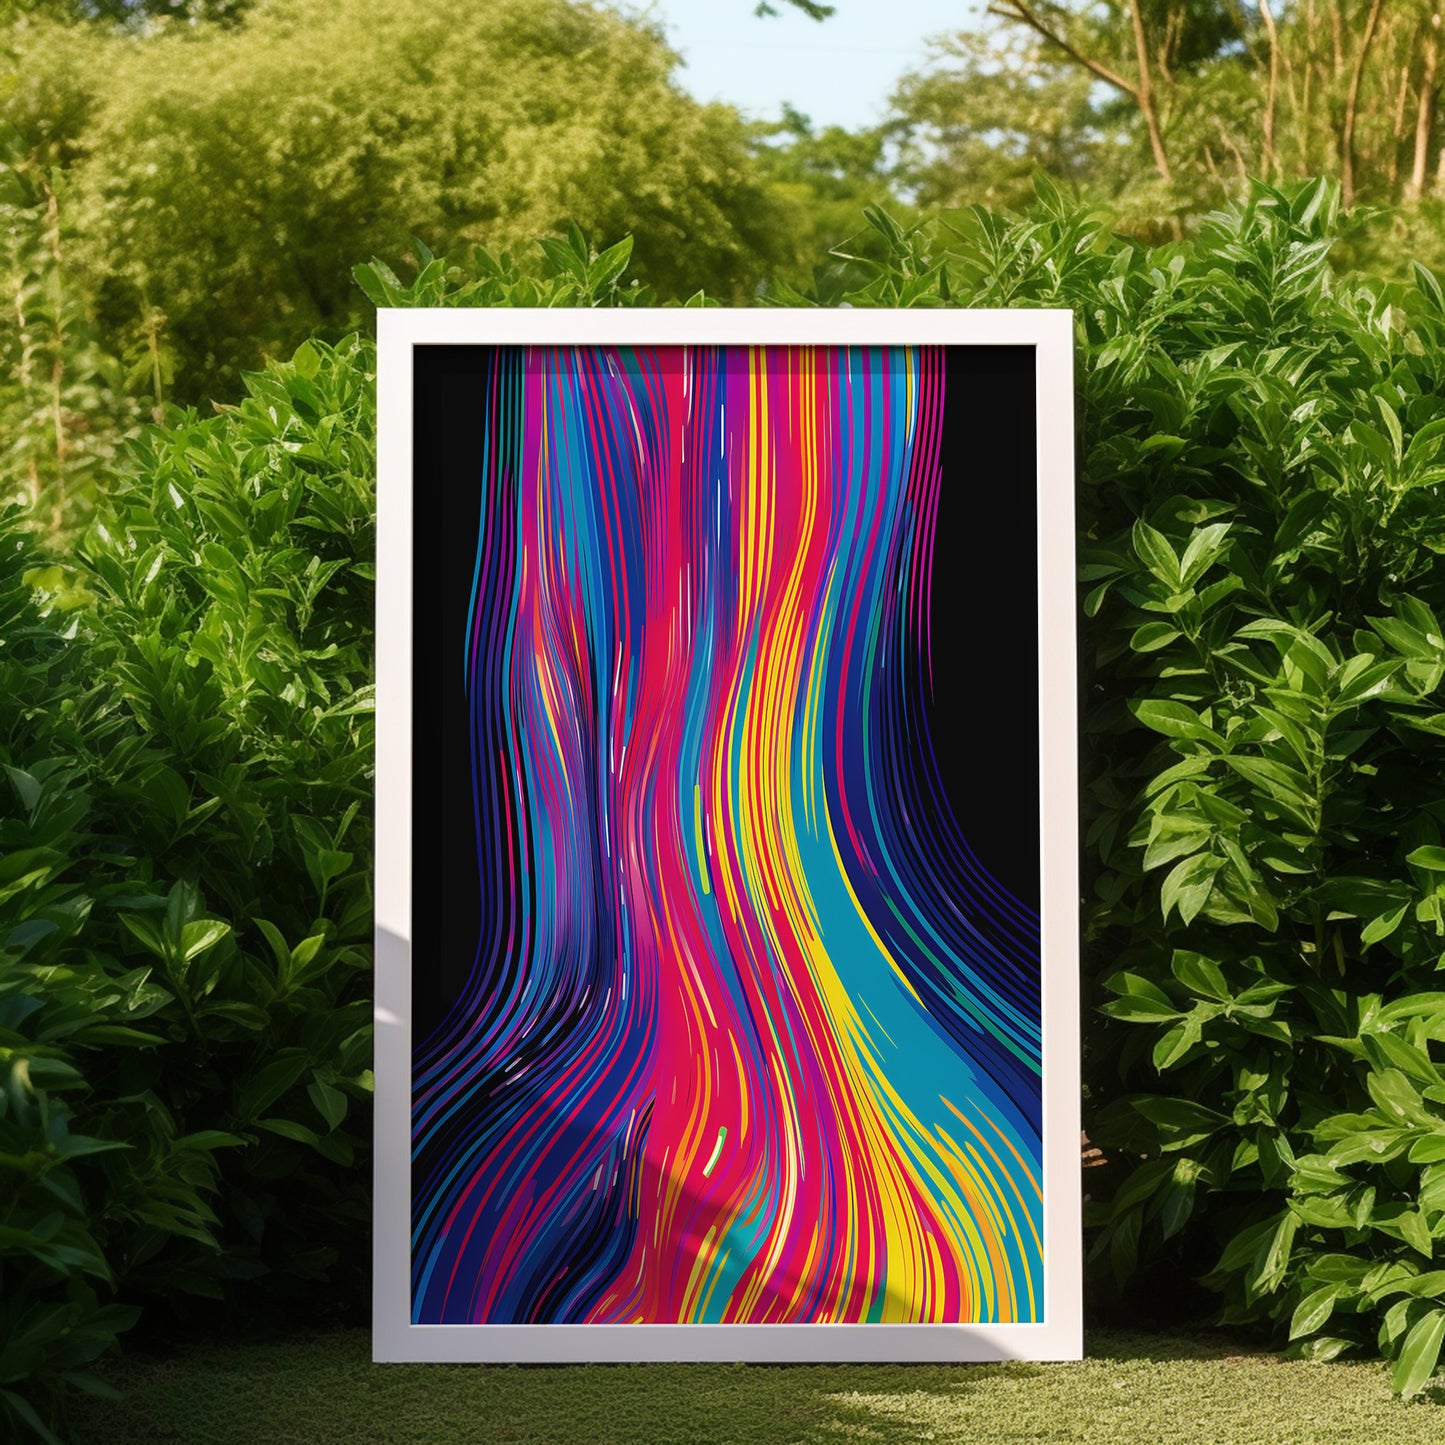 Abstract colorful wavy lines art in a frame surrounded by green bushes.